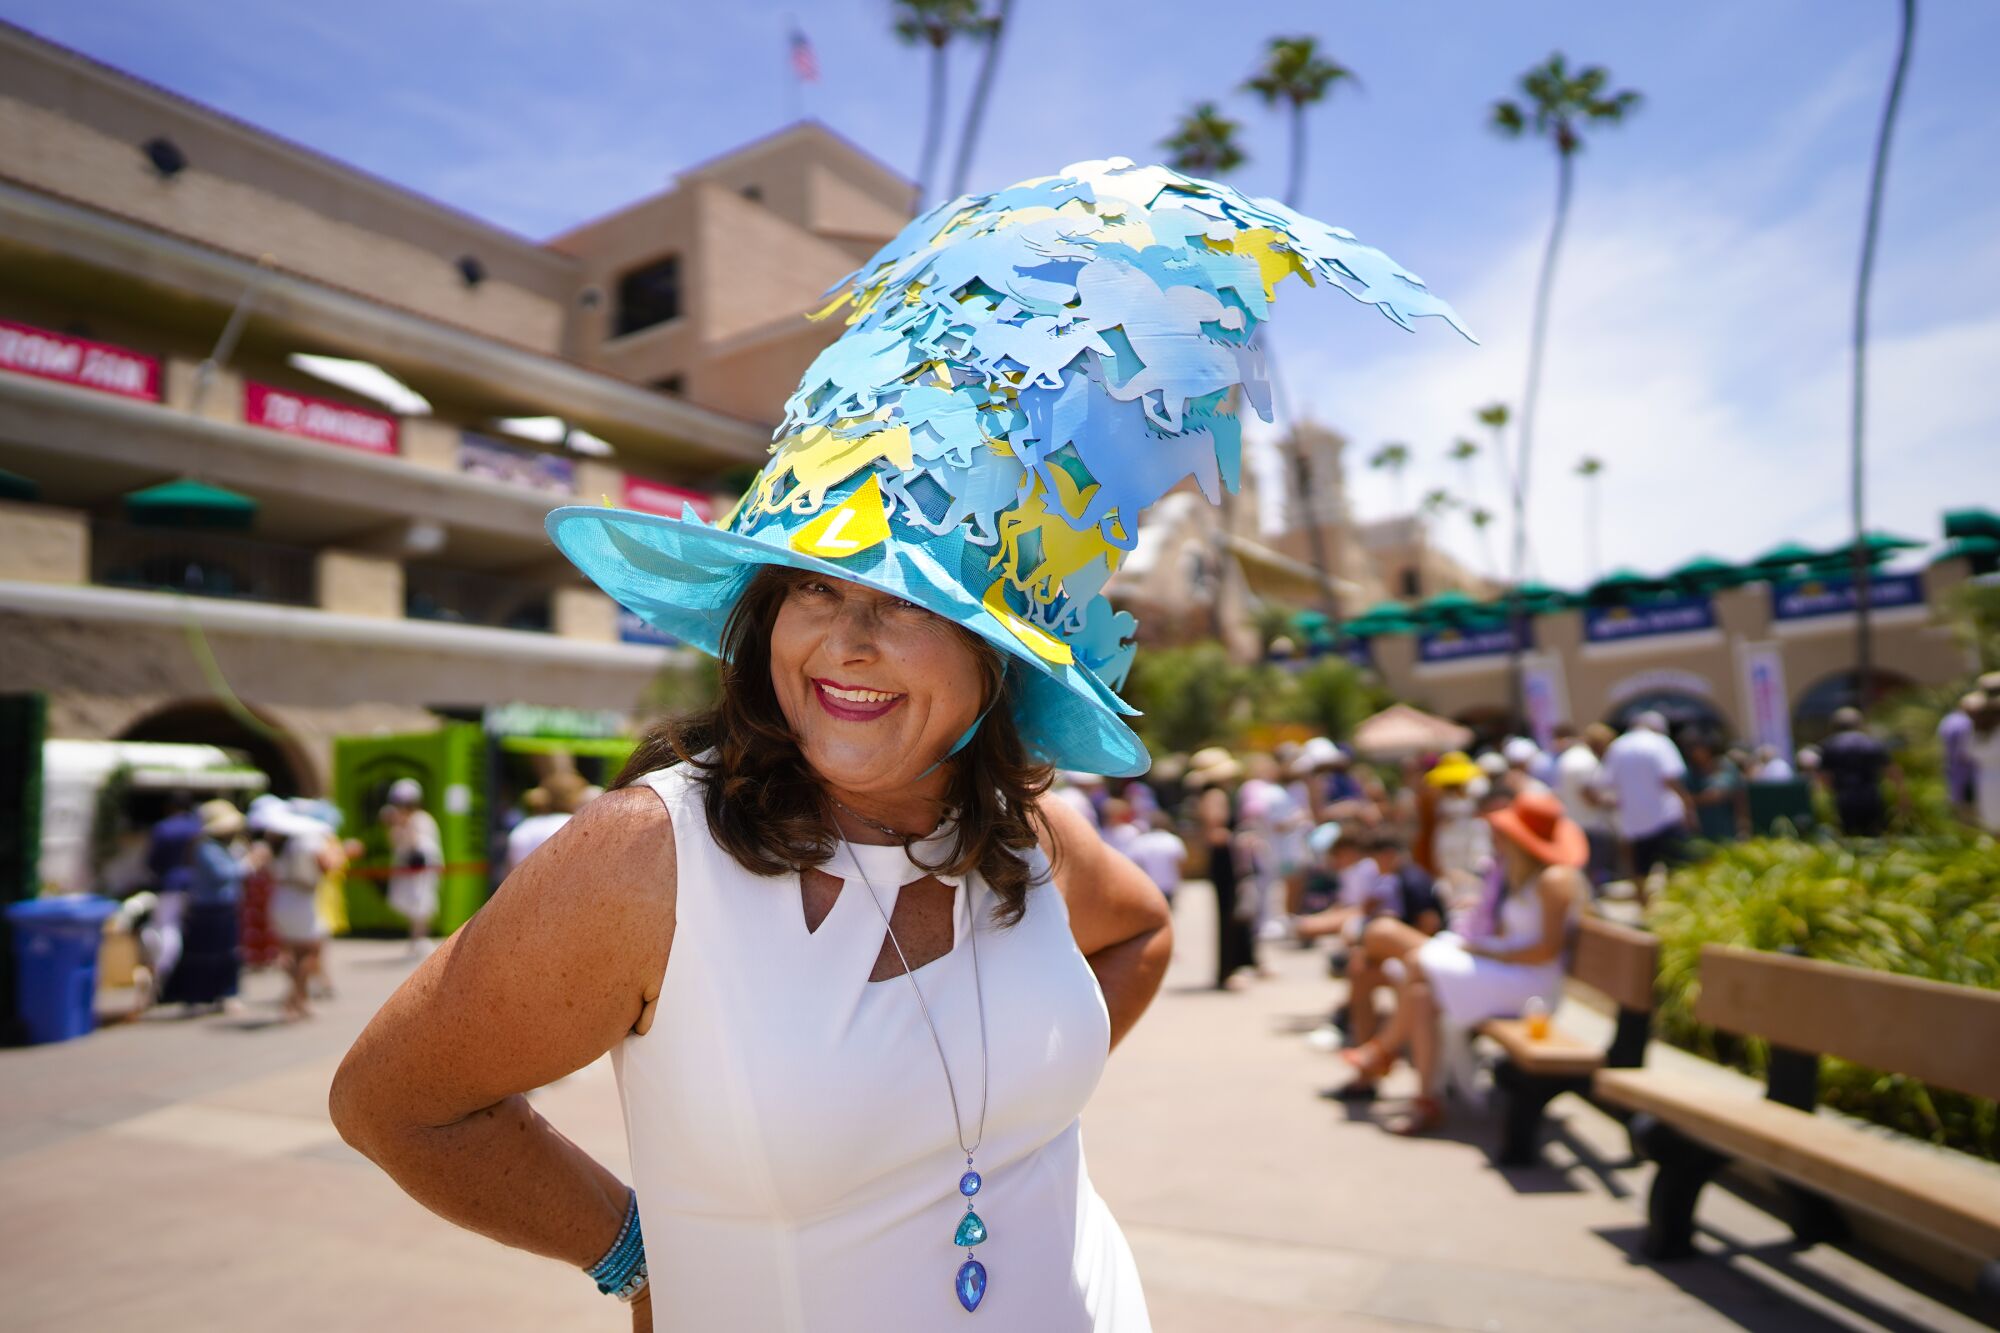 Lori Shelton from Scripps Ranchwas among the race fans taking part in the tradition of wearing hats on opening day.